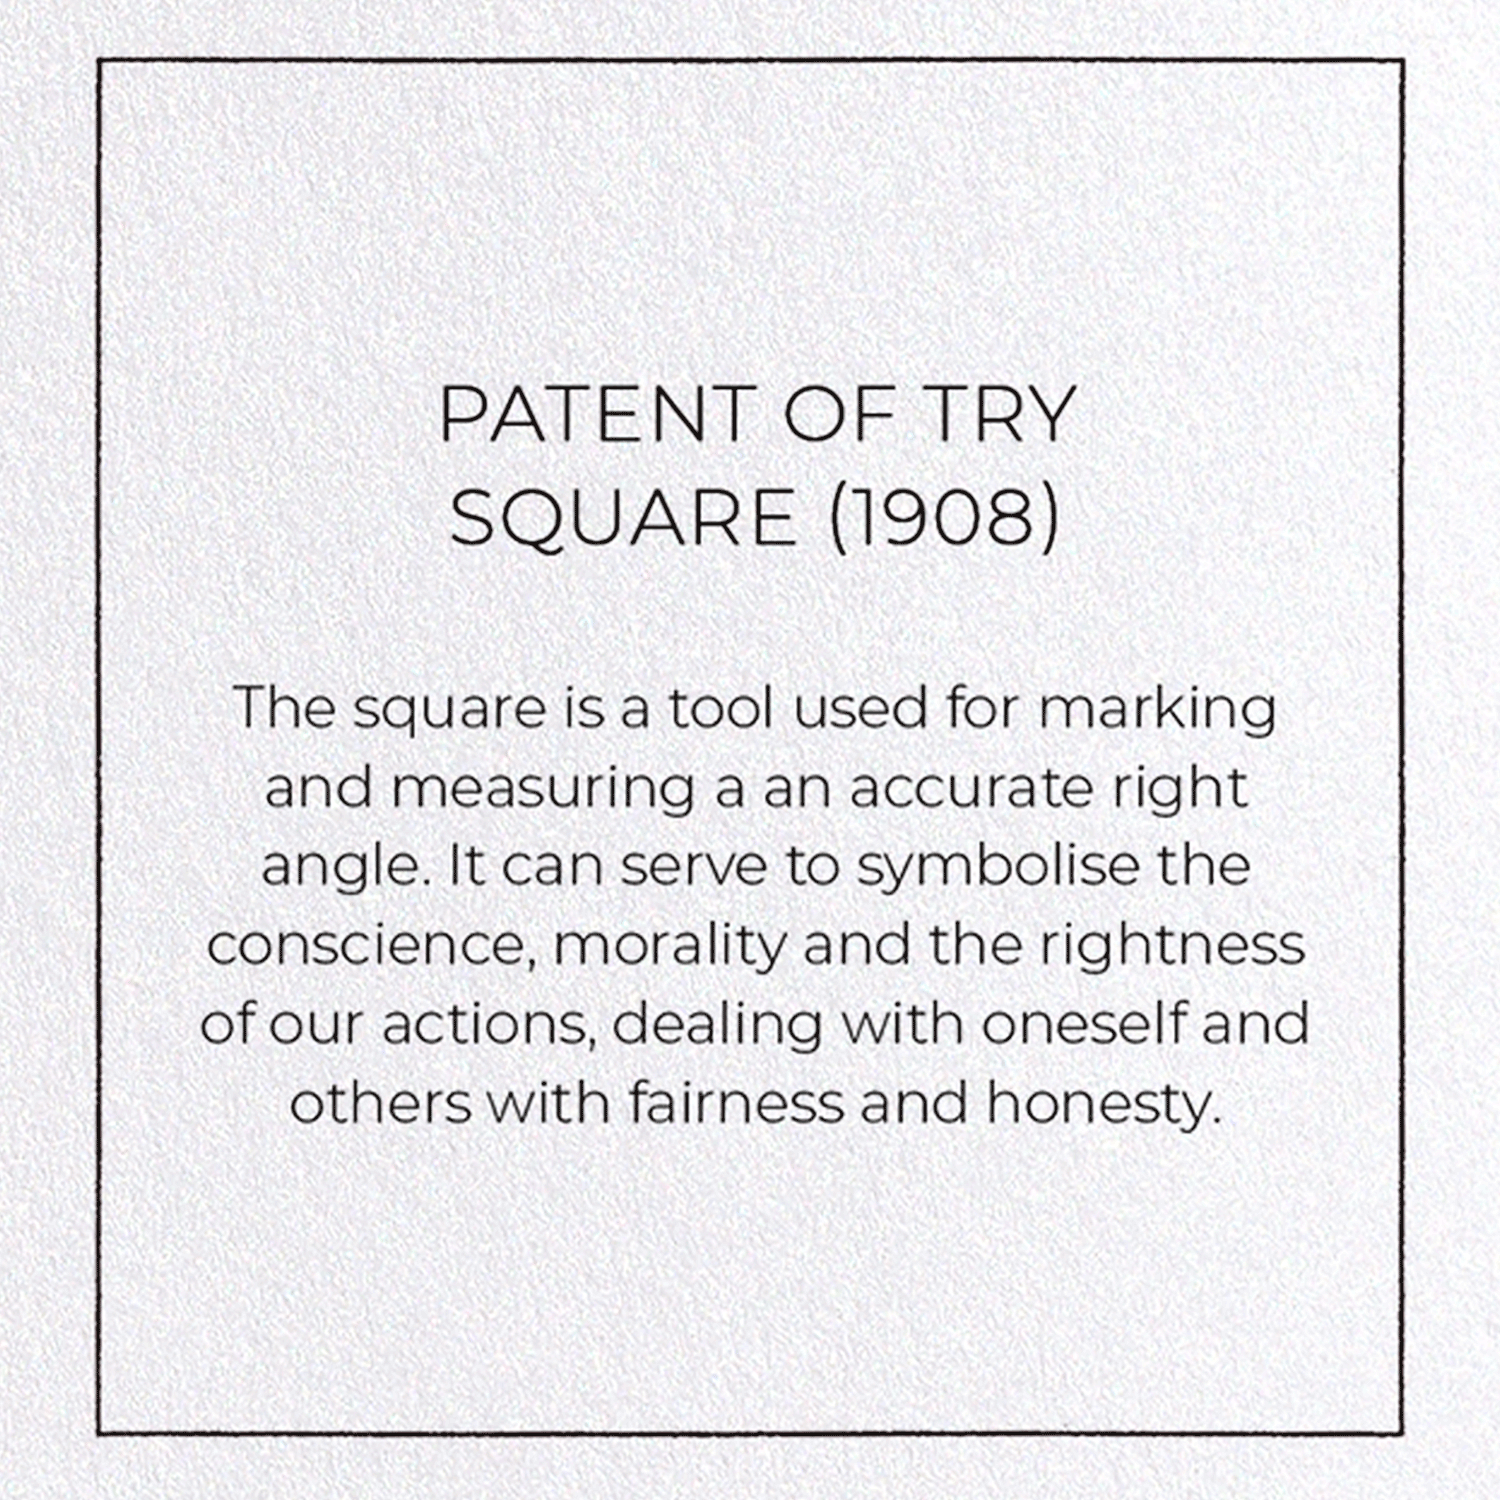 PATENT OF TRY SQUARE (1908)